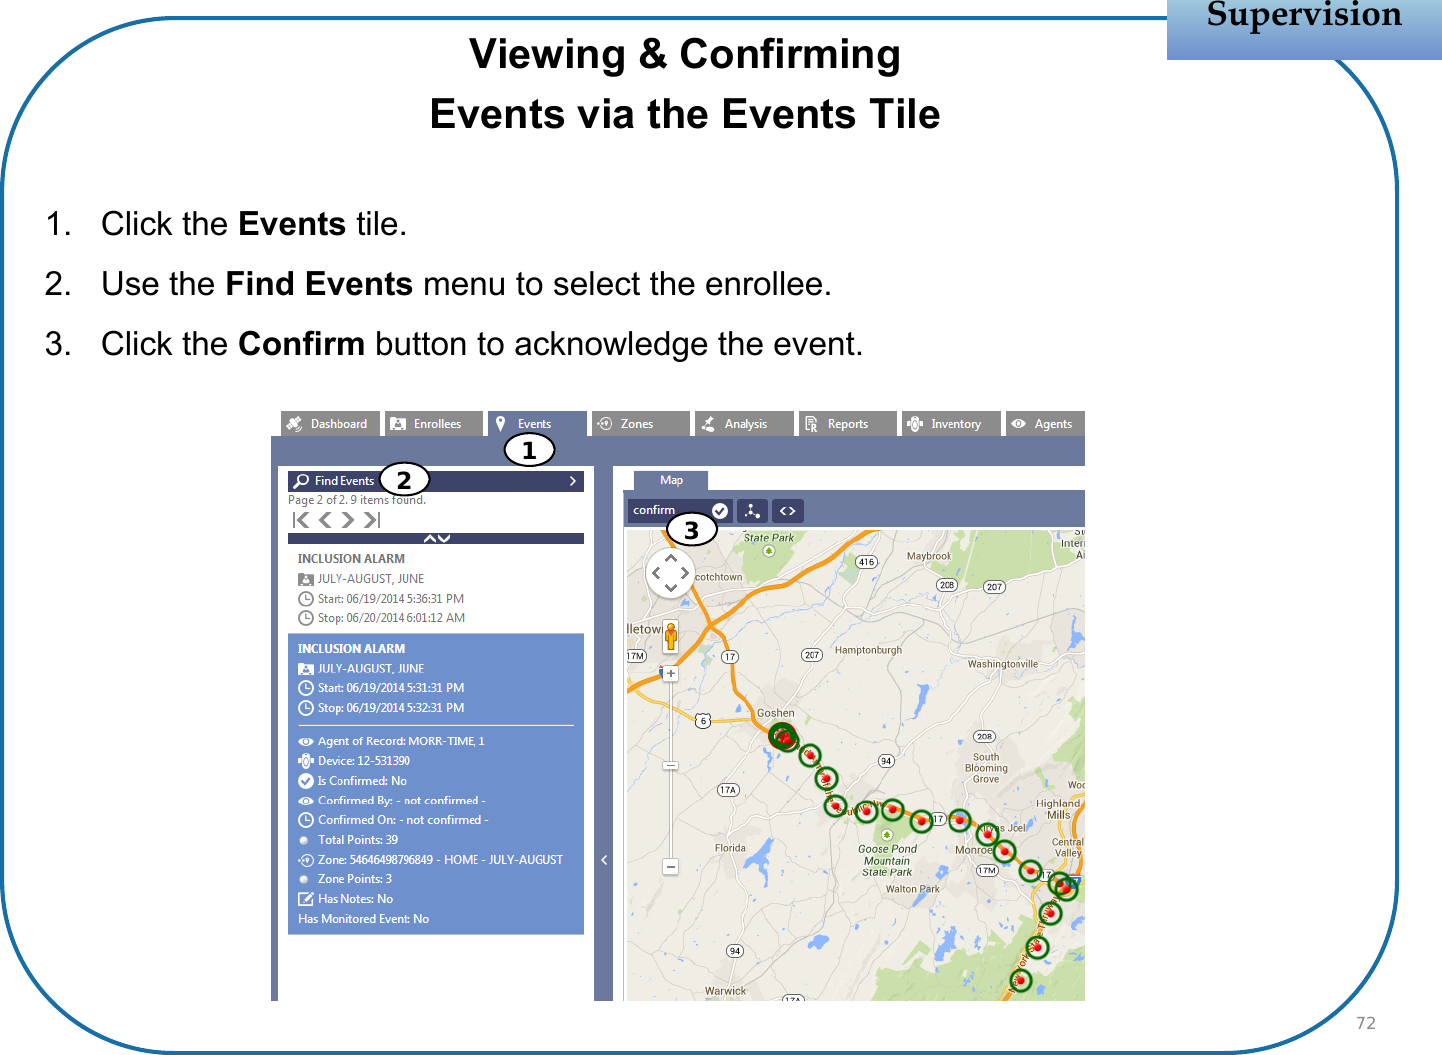 Viewing &amp; ConfirmingEvents via the Events Tile1. Click the Events tile.2. Use the Find Events menu to select the enrollee.3. Click the Confirm button to acknowledge the event.SupervisionSupervision72312